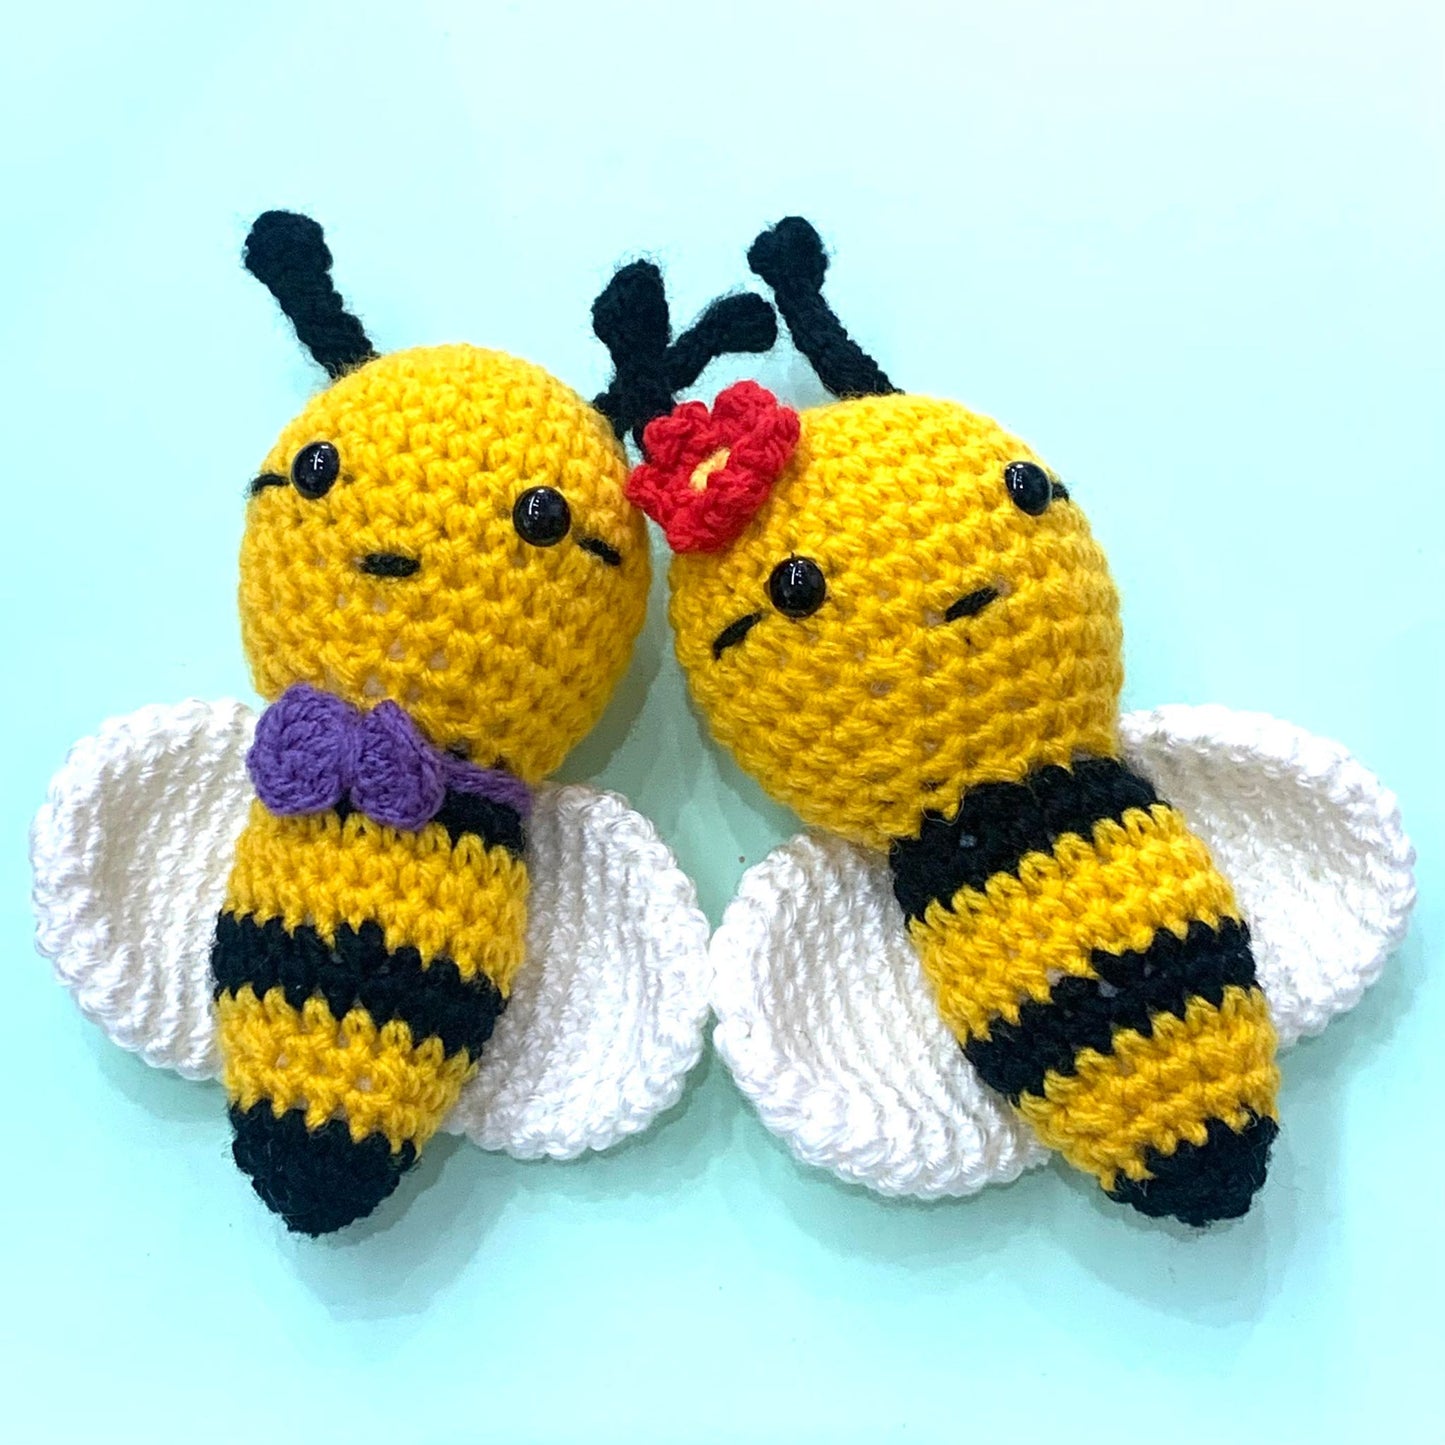 BEAKNITS - CROCHETED BUMBLE BEE- Red Flower